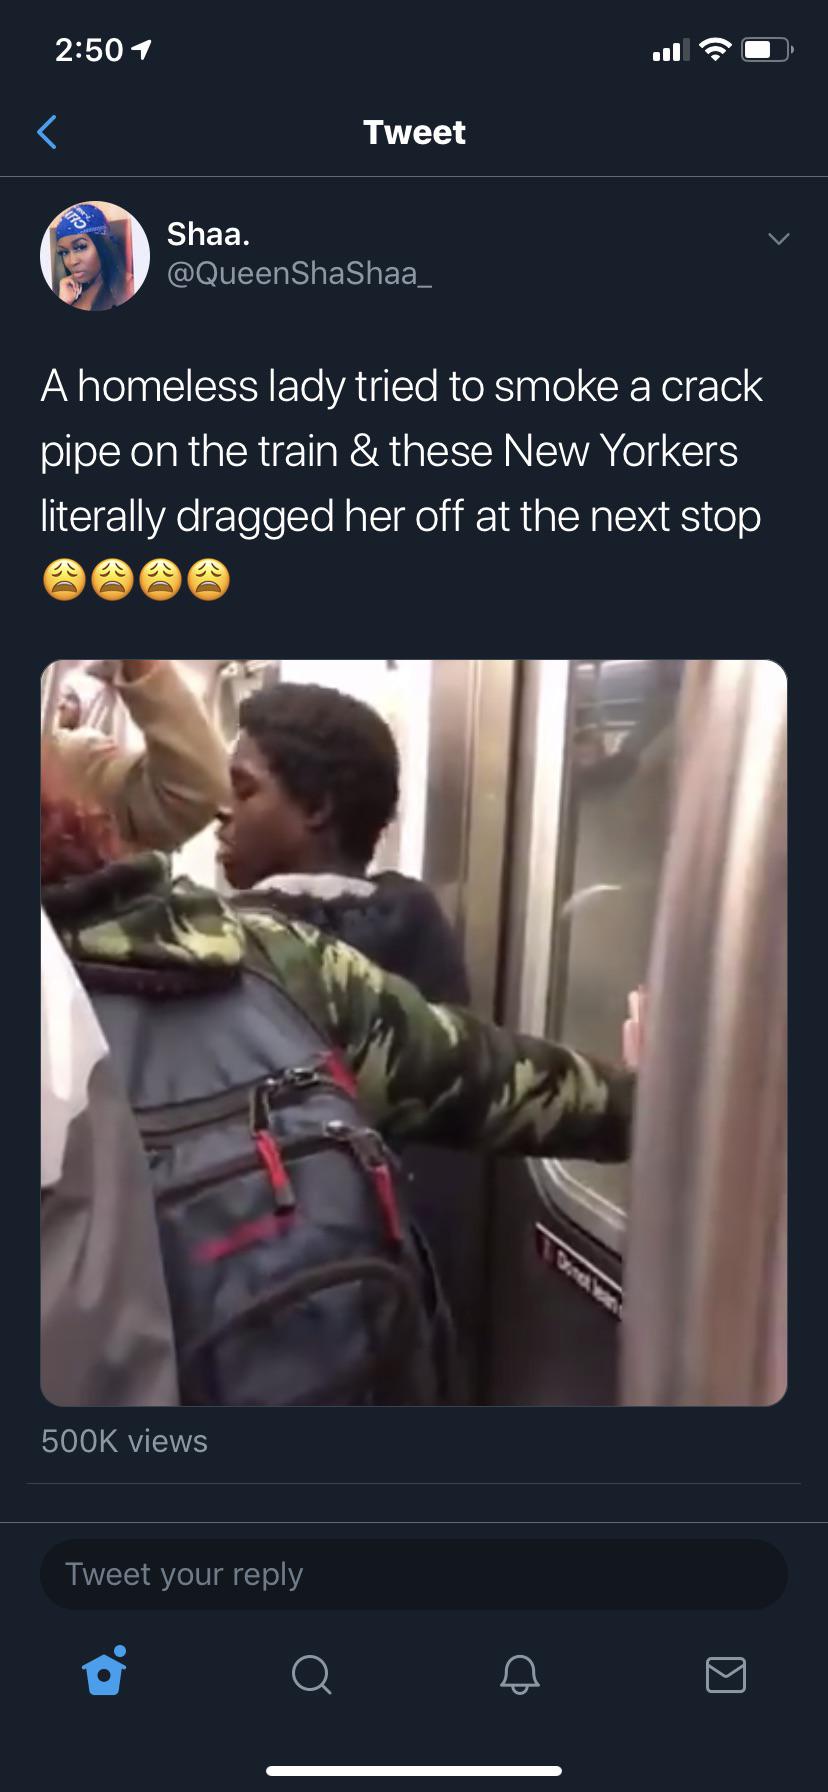 video - Tweet Shaa. A homeless lady tried to smoke a crack pipe on the train & these New Yorkers literally dragged her off at the next stop views Tweet your i aa o